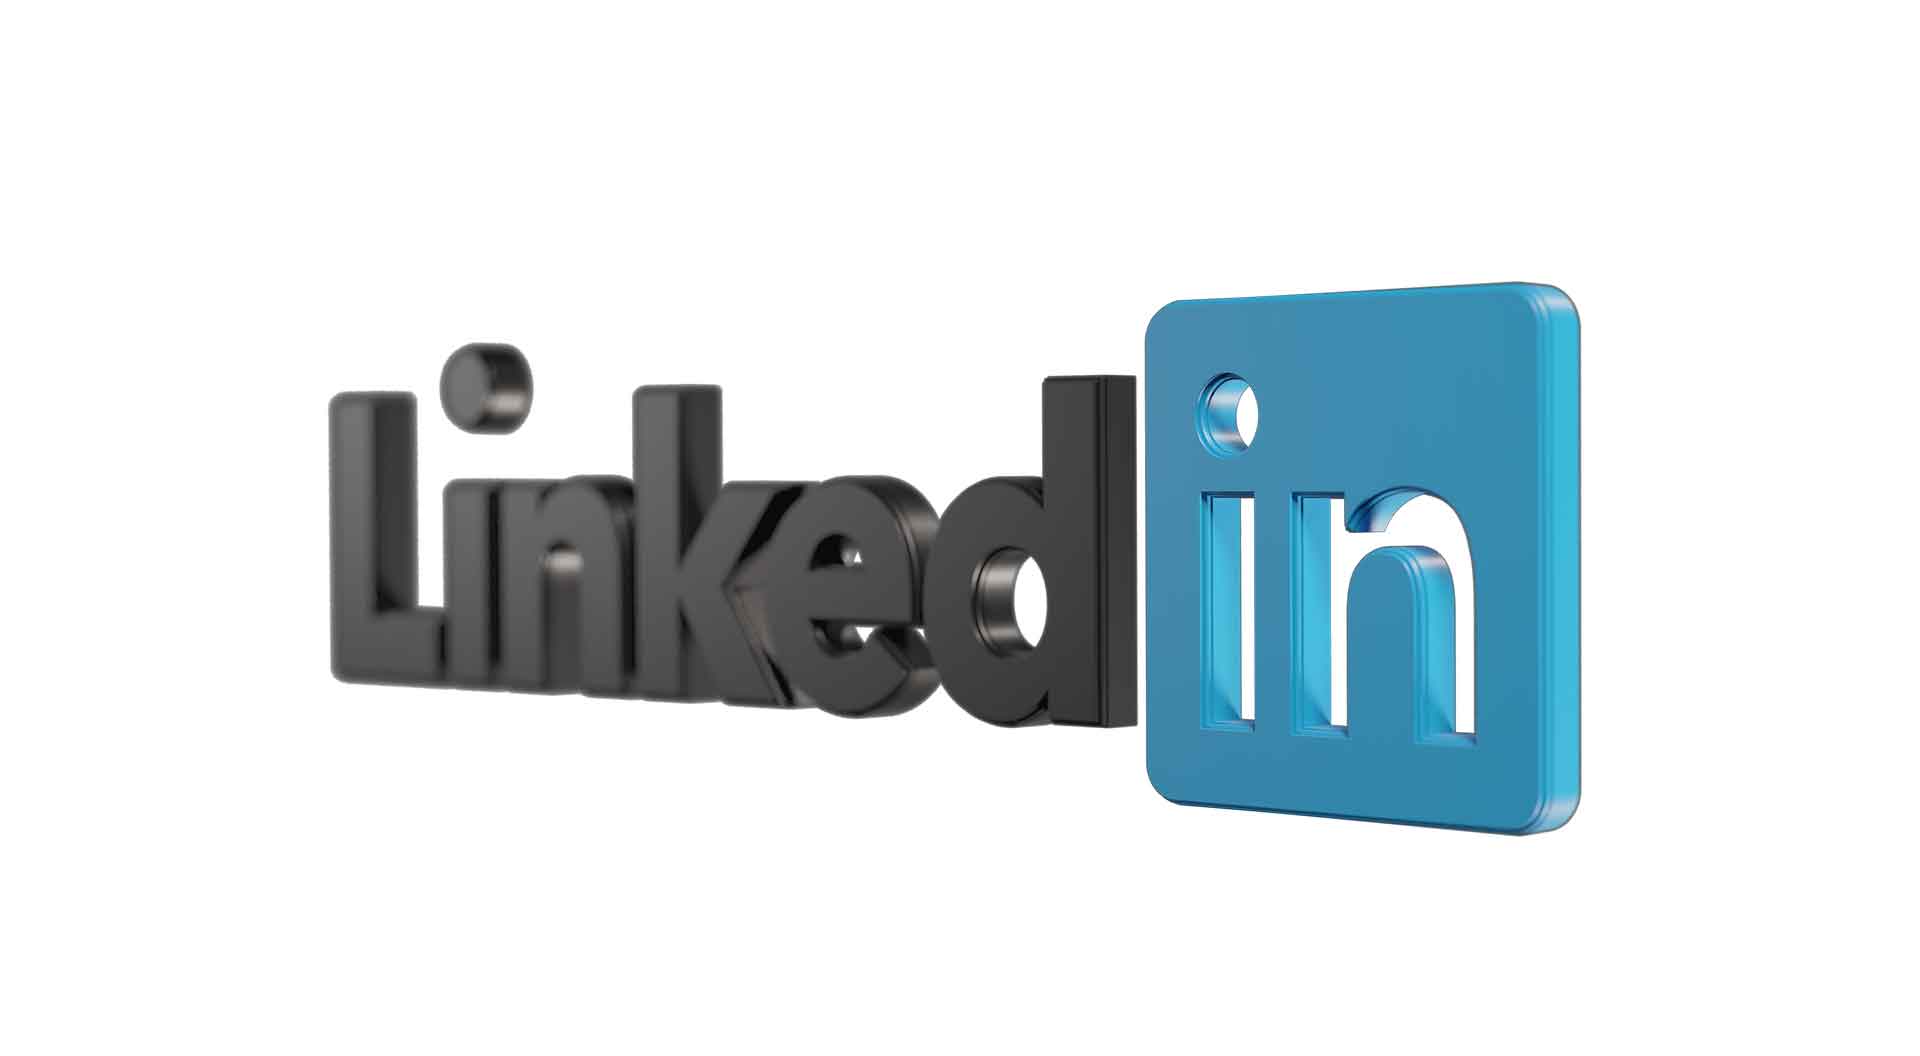 Supercharge Your LinkedIn Marketing Today for Tomorrow’s Growth